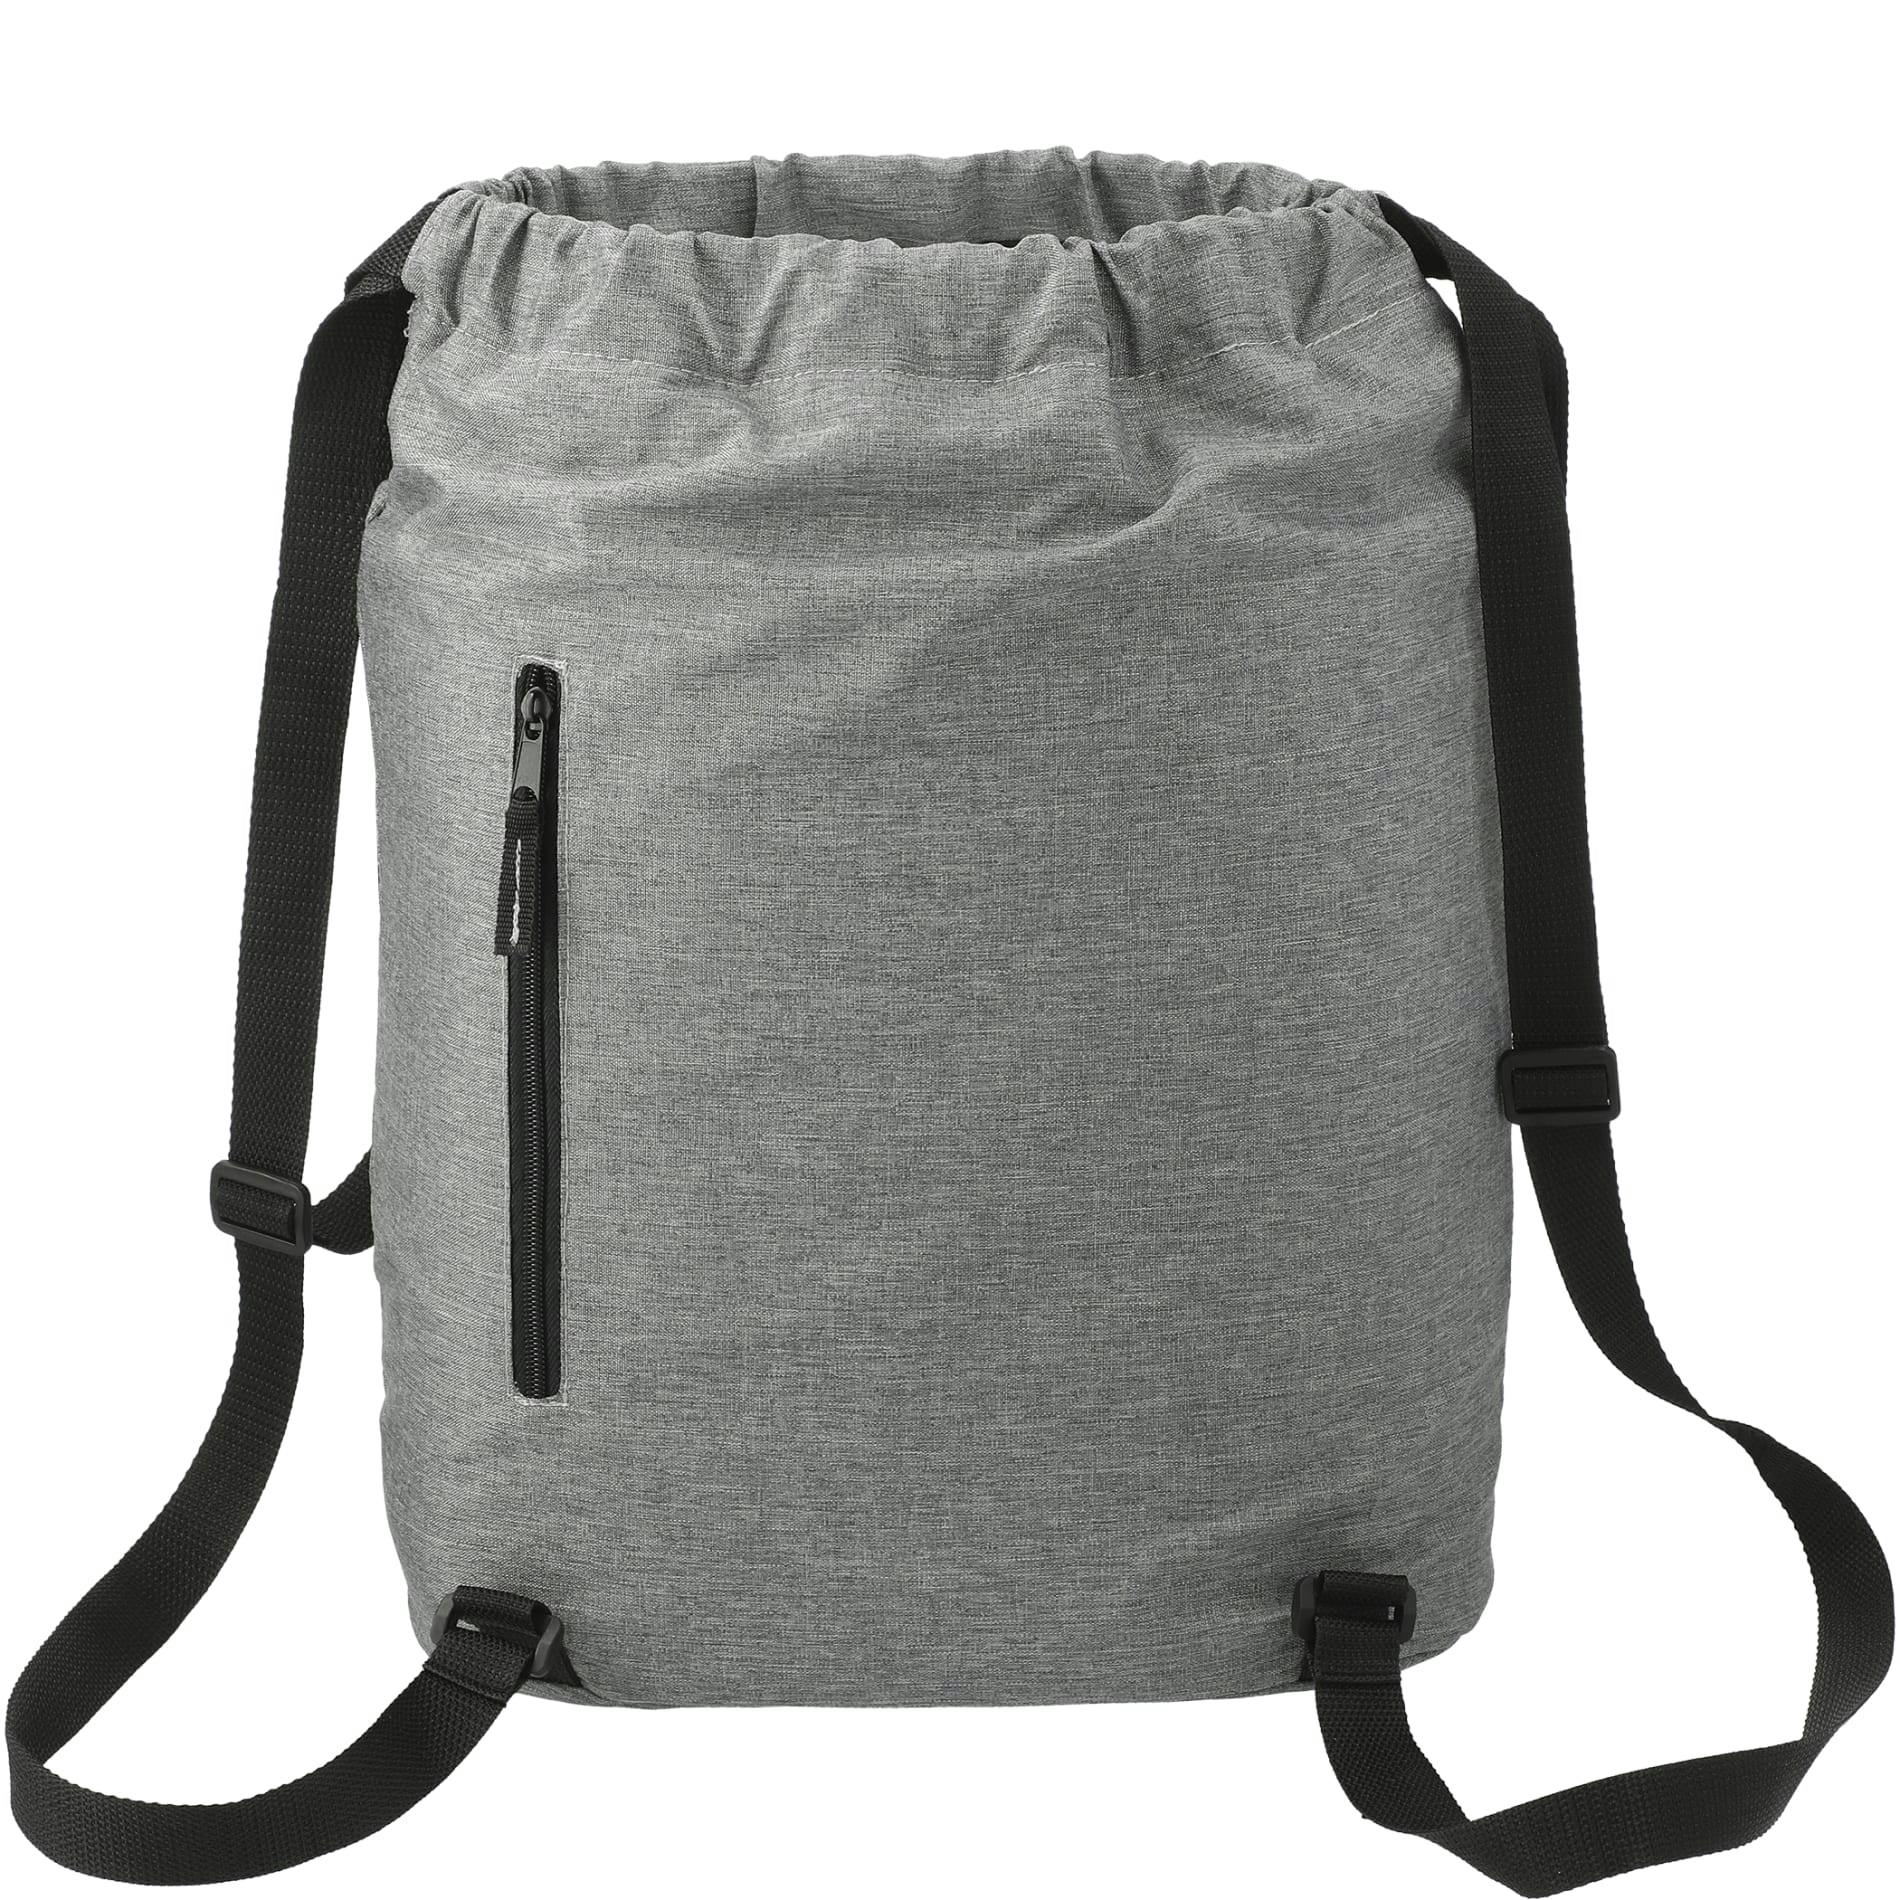 Essentials Recycled Insulated Drawstring - additional Image 1